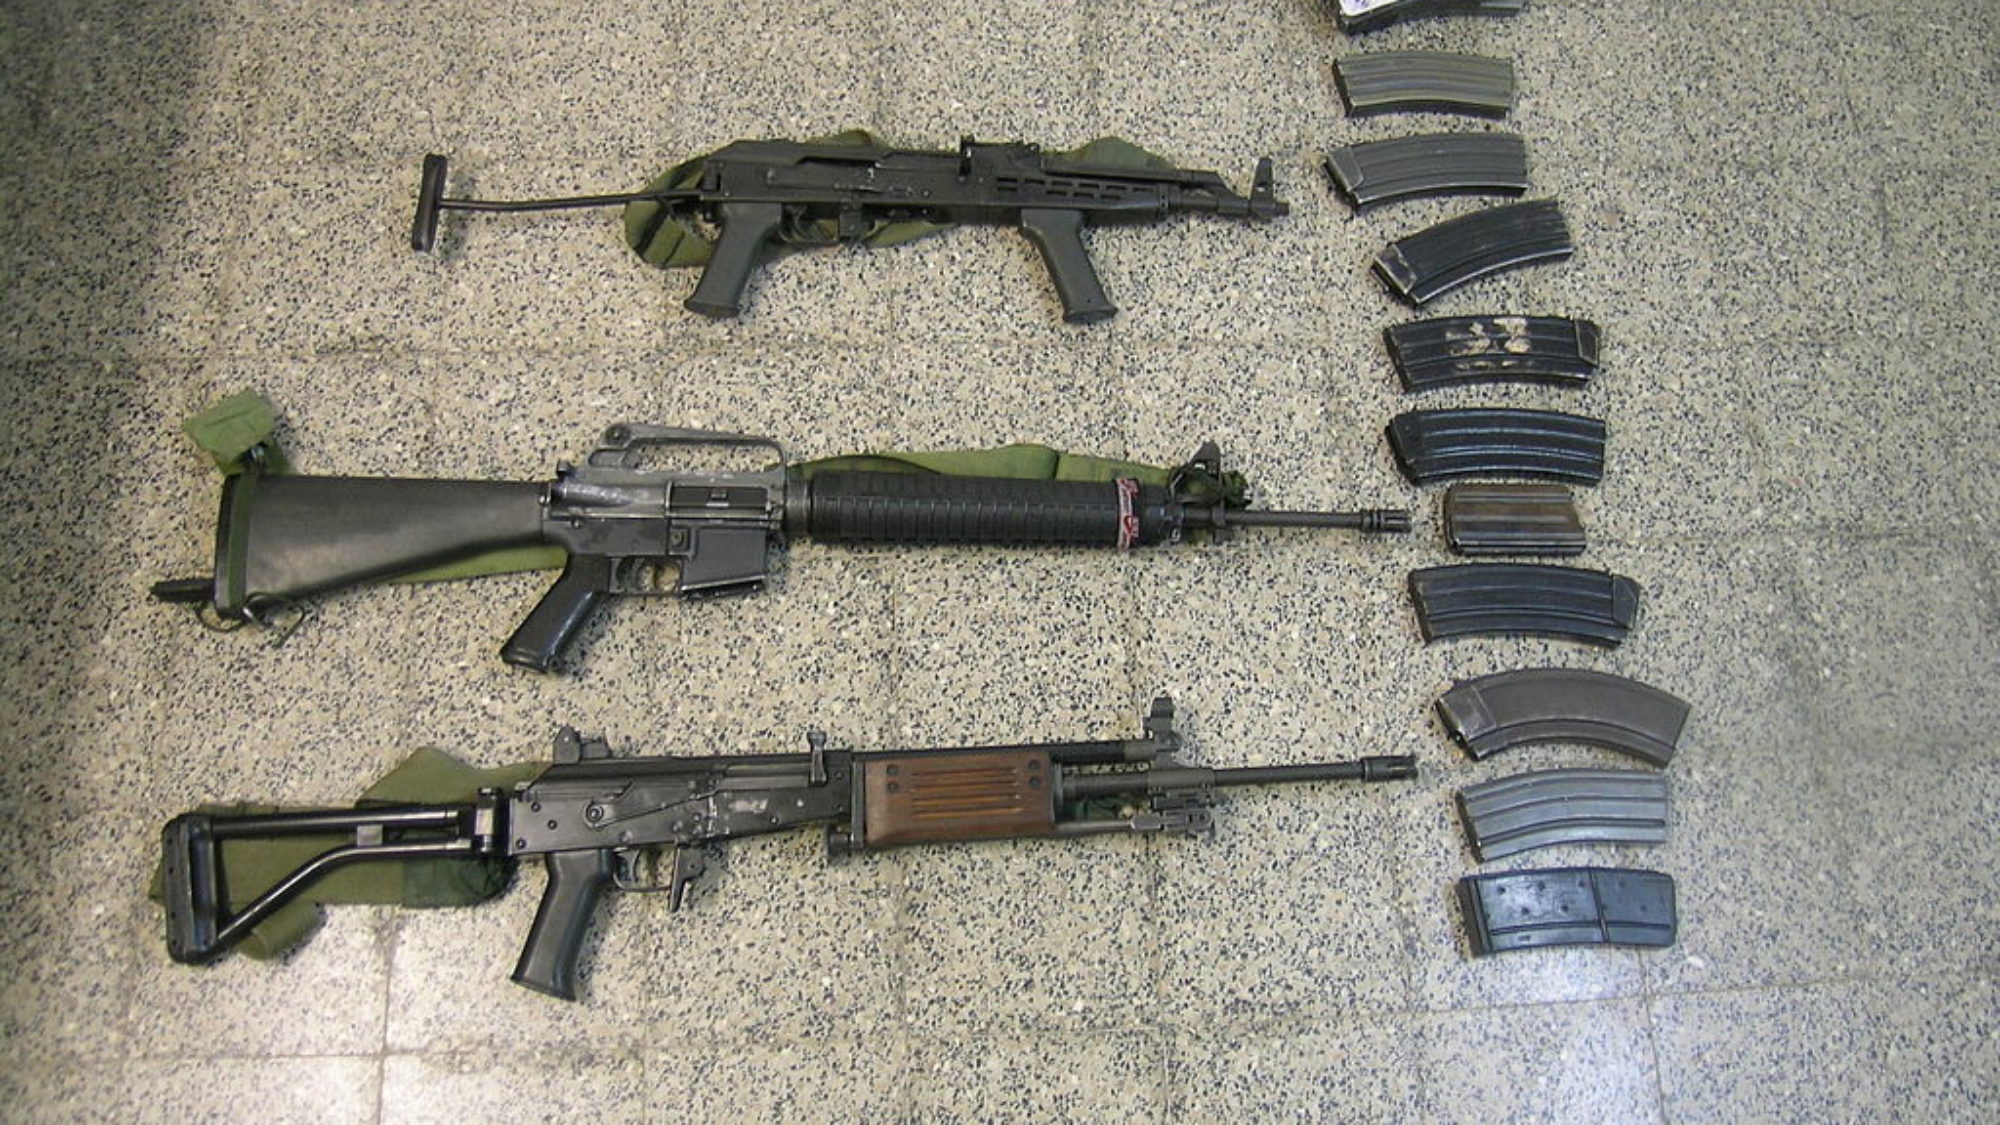 Israel Defense Forces - Militant in Possession of Explosives and Multiple Guns